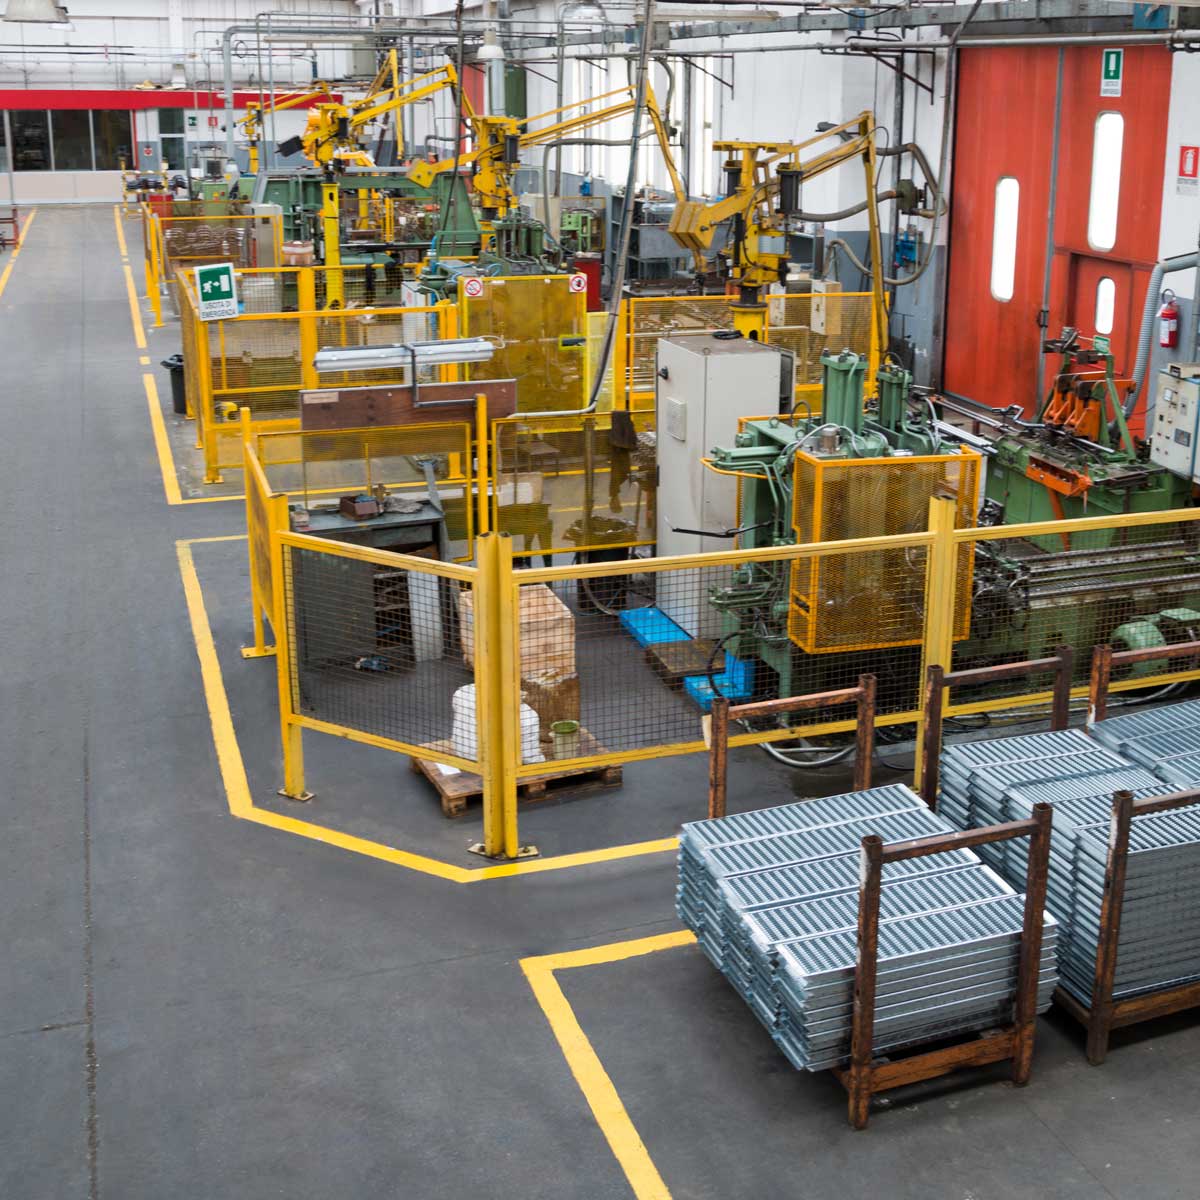 picture of a manufacturing floor with equipment and technology